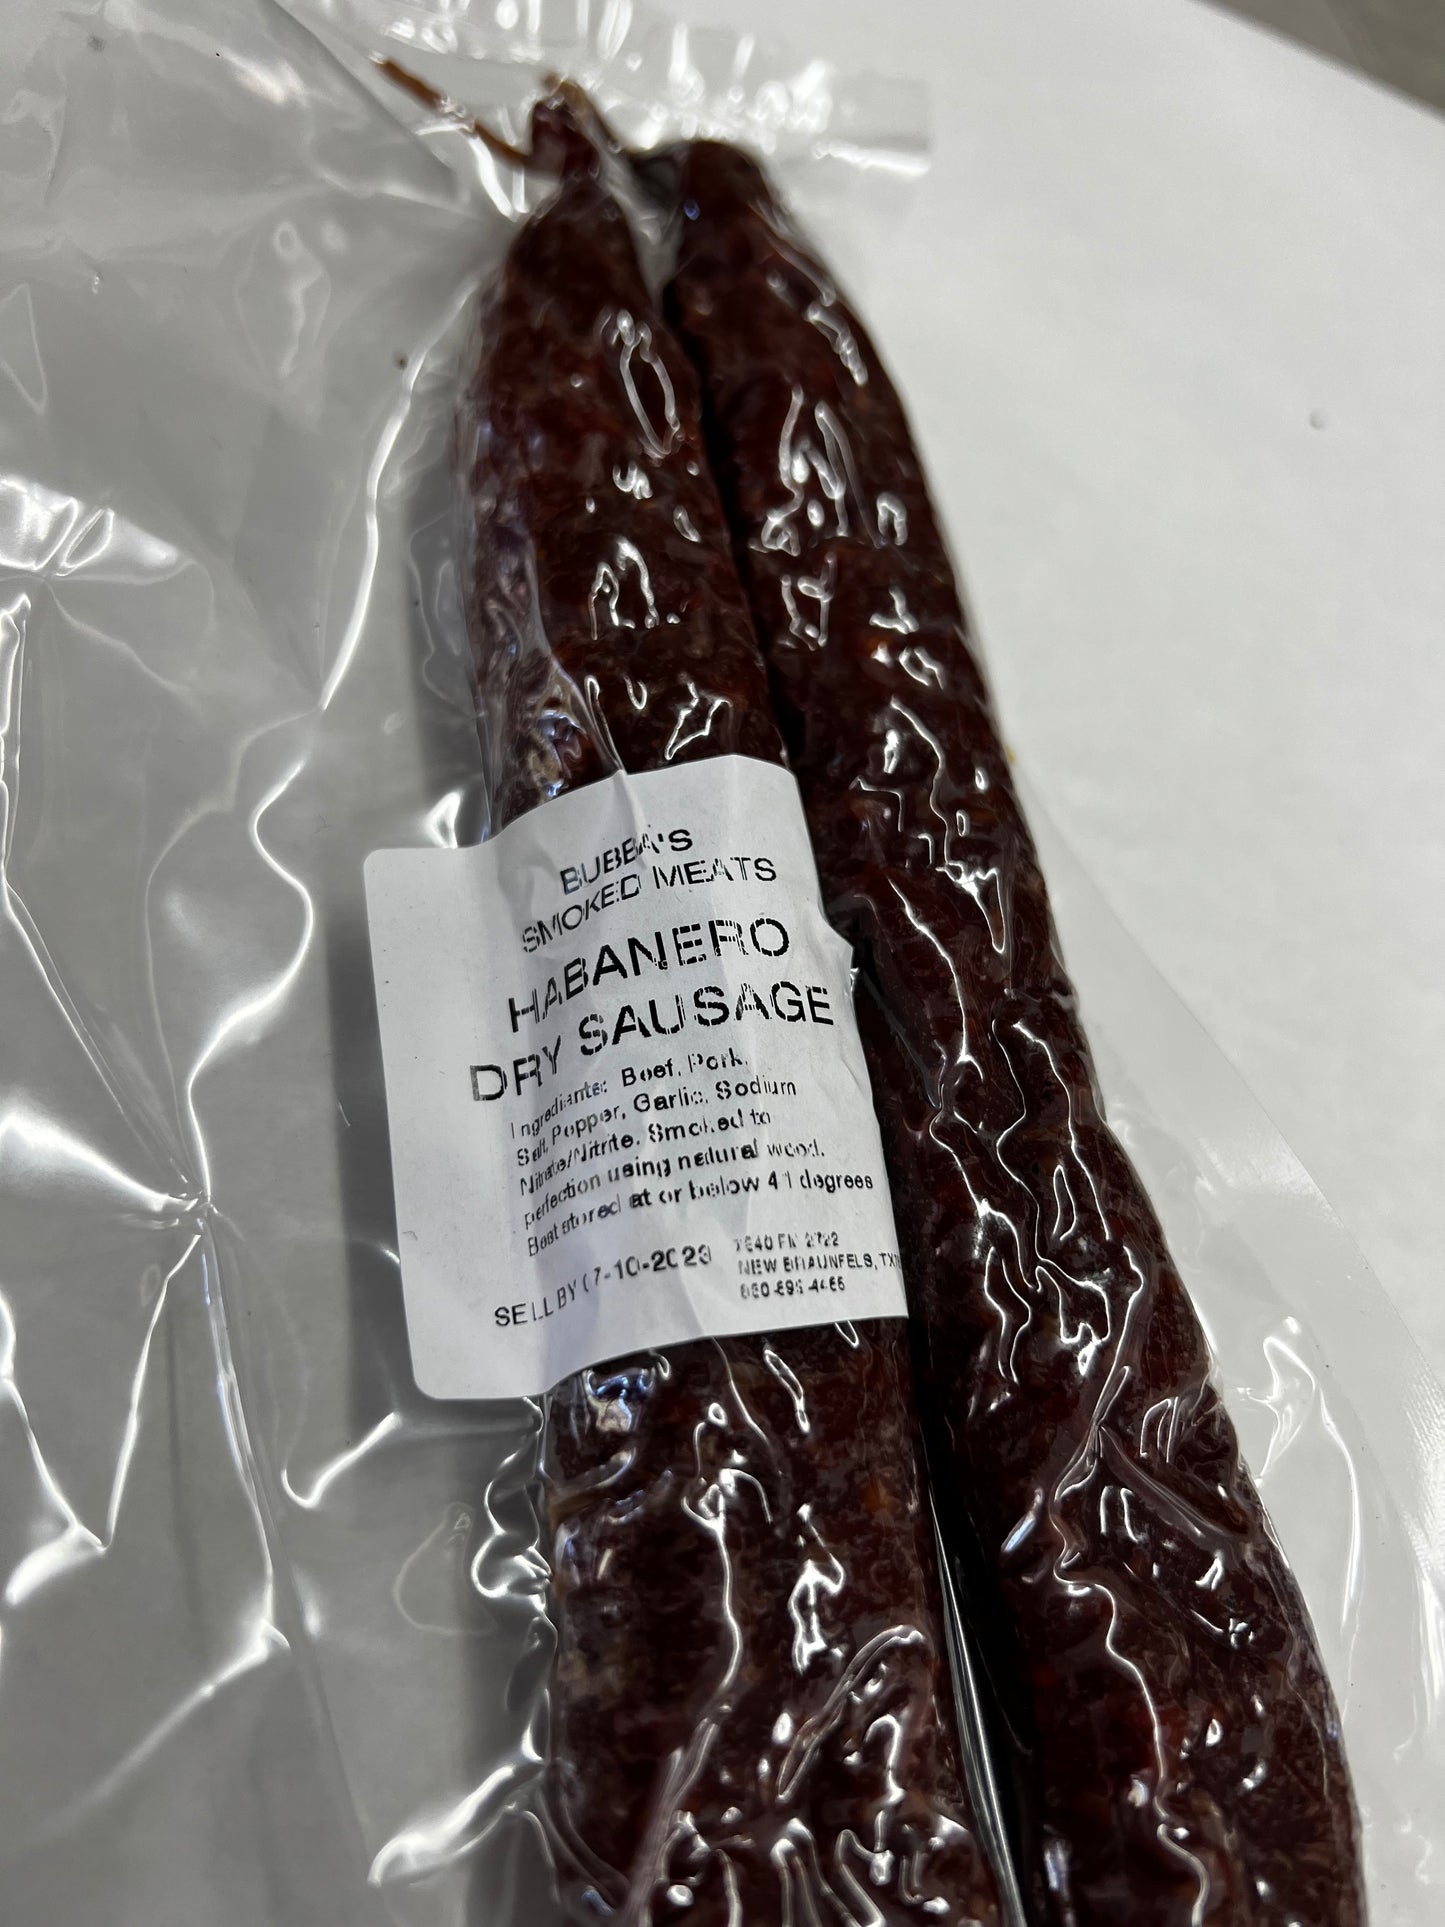 Habanero Dry link Sausage that will change your life & you May get promoted..